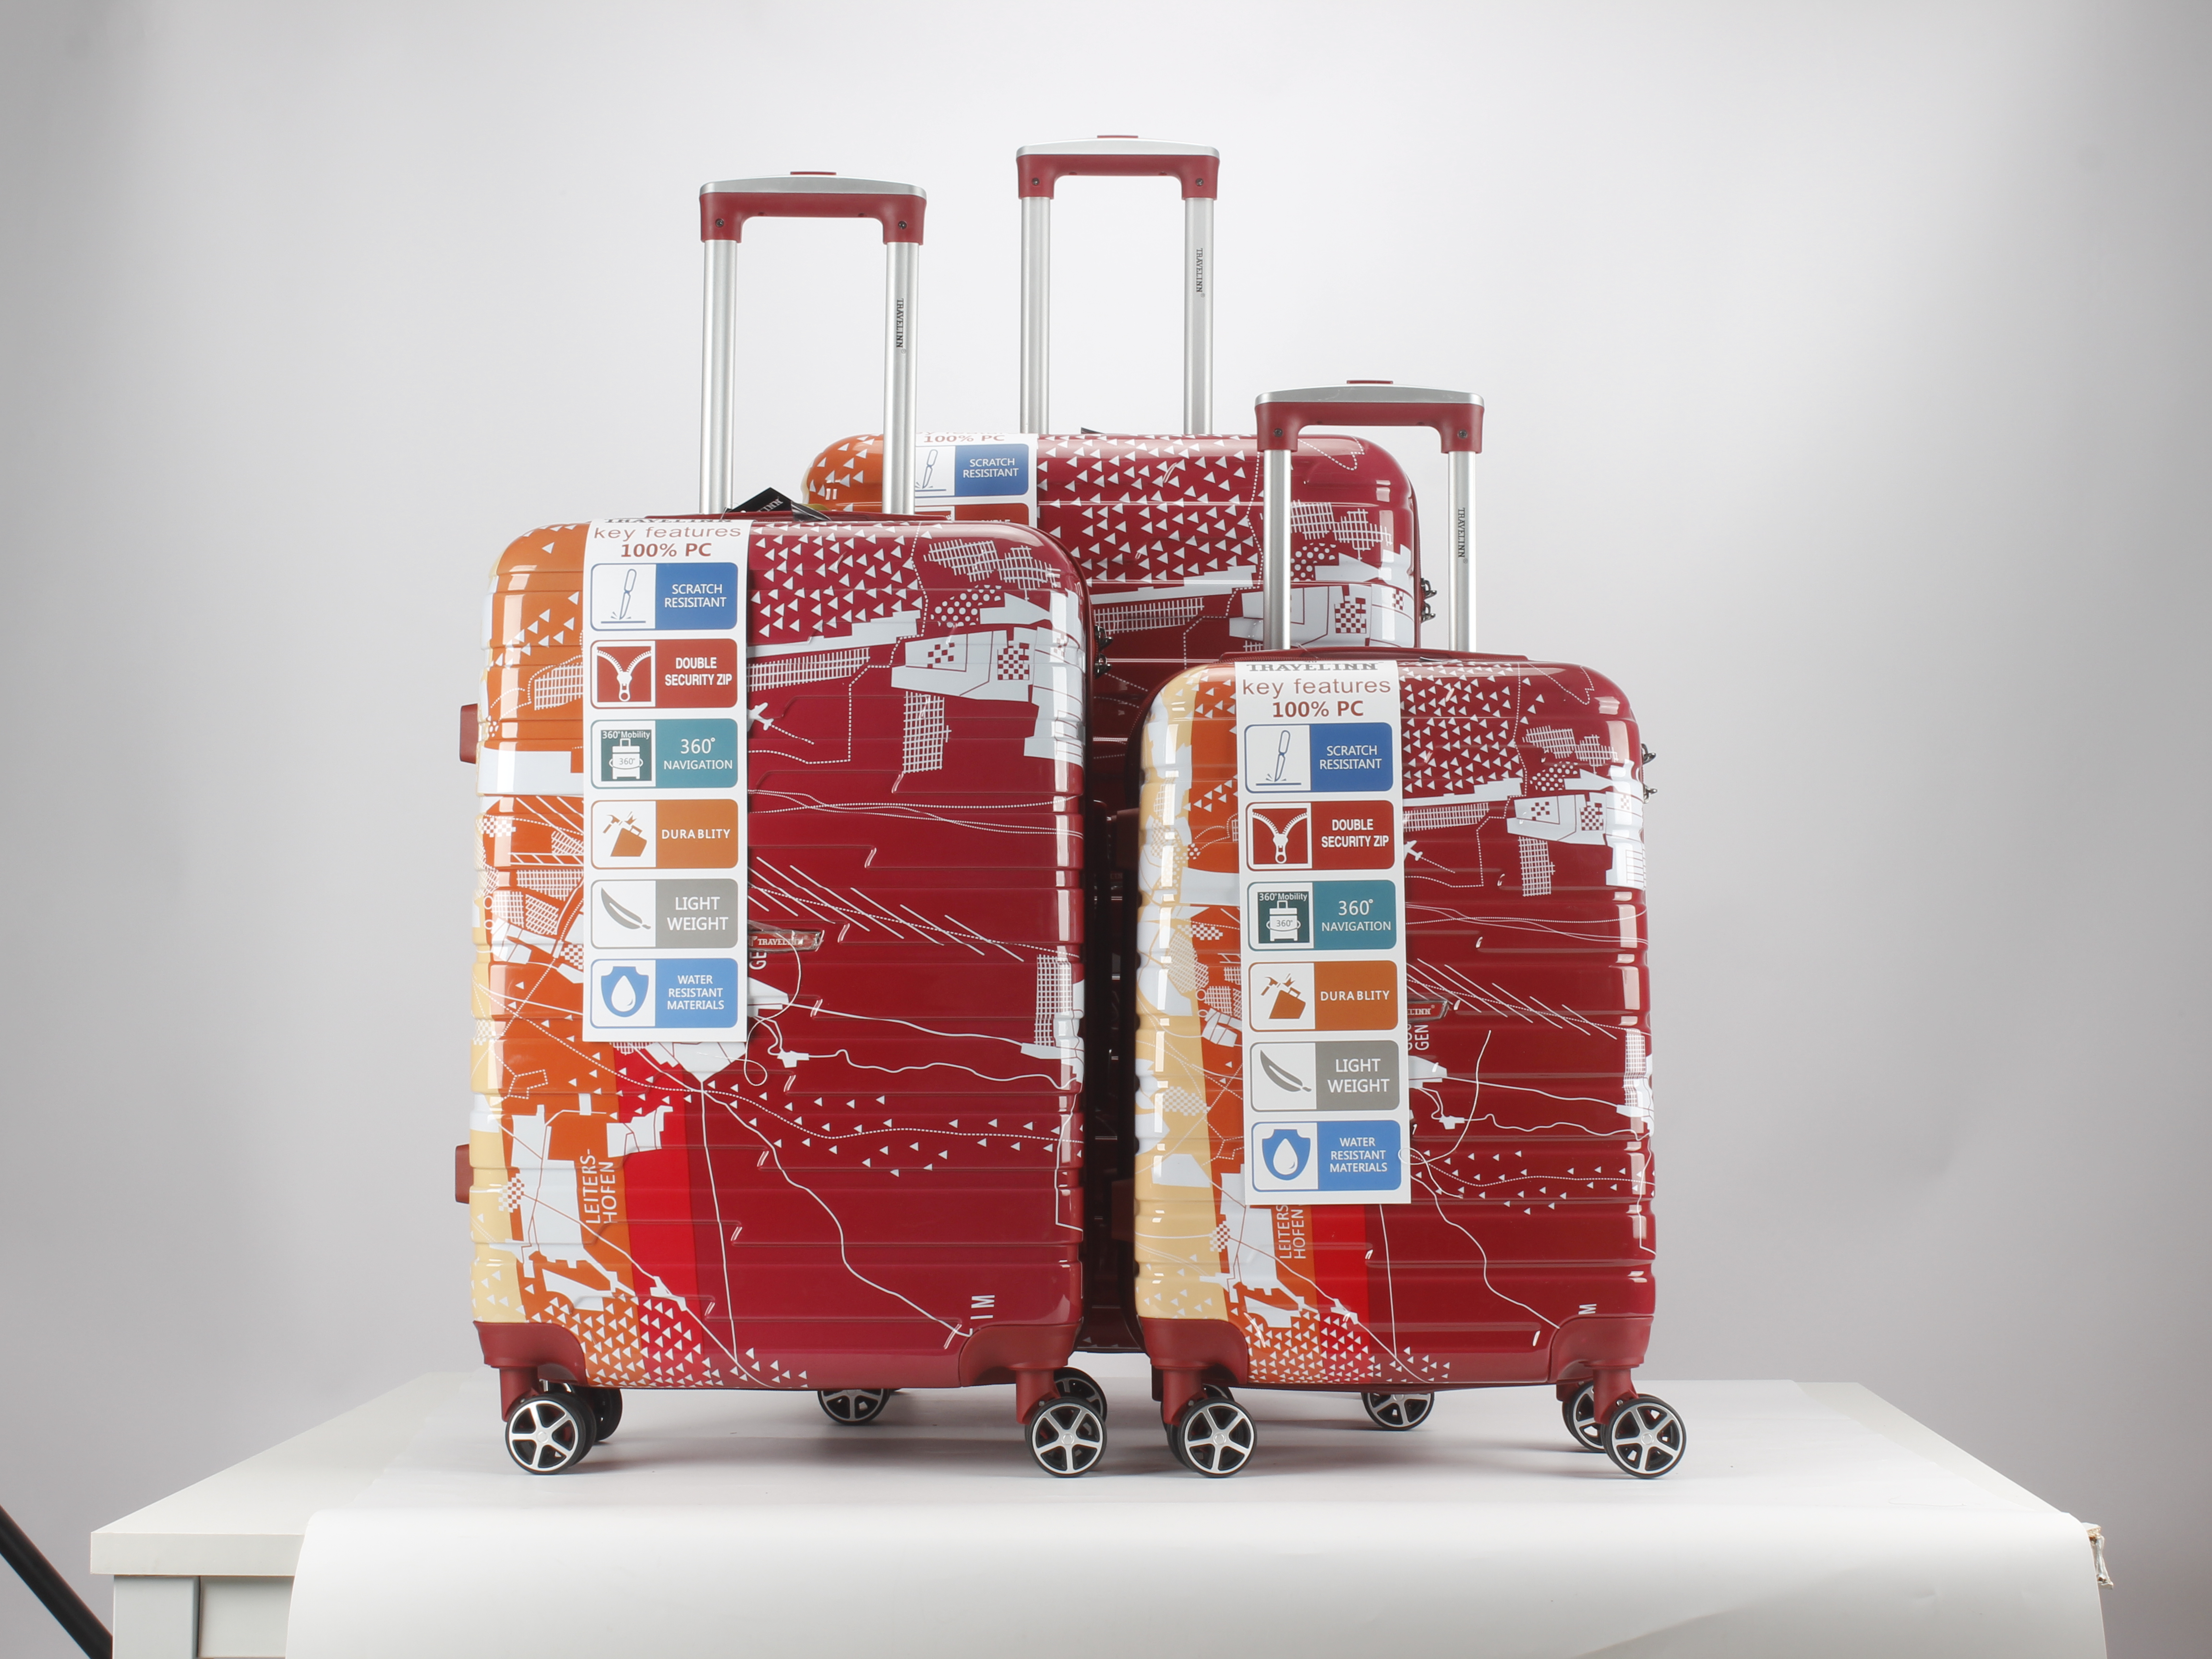 Discover Affordable Luggage Sets - Perfect for Traveling in Style!